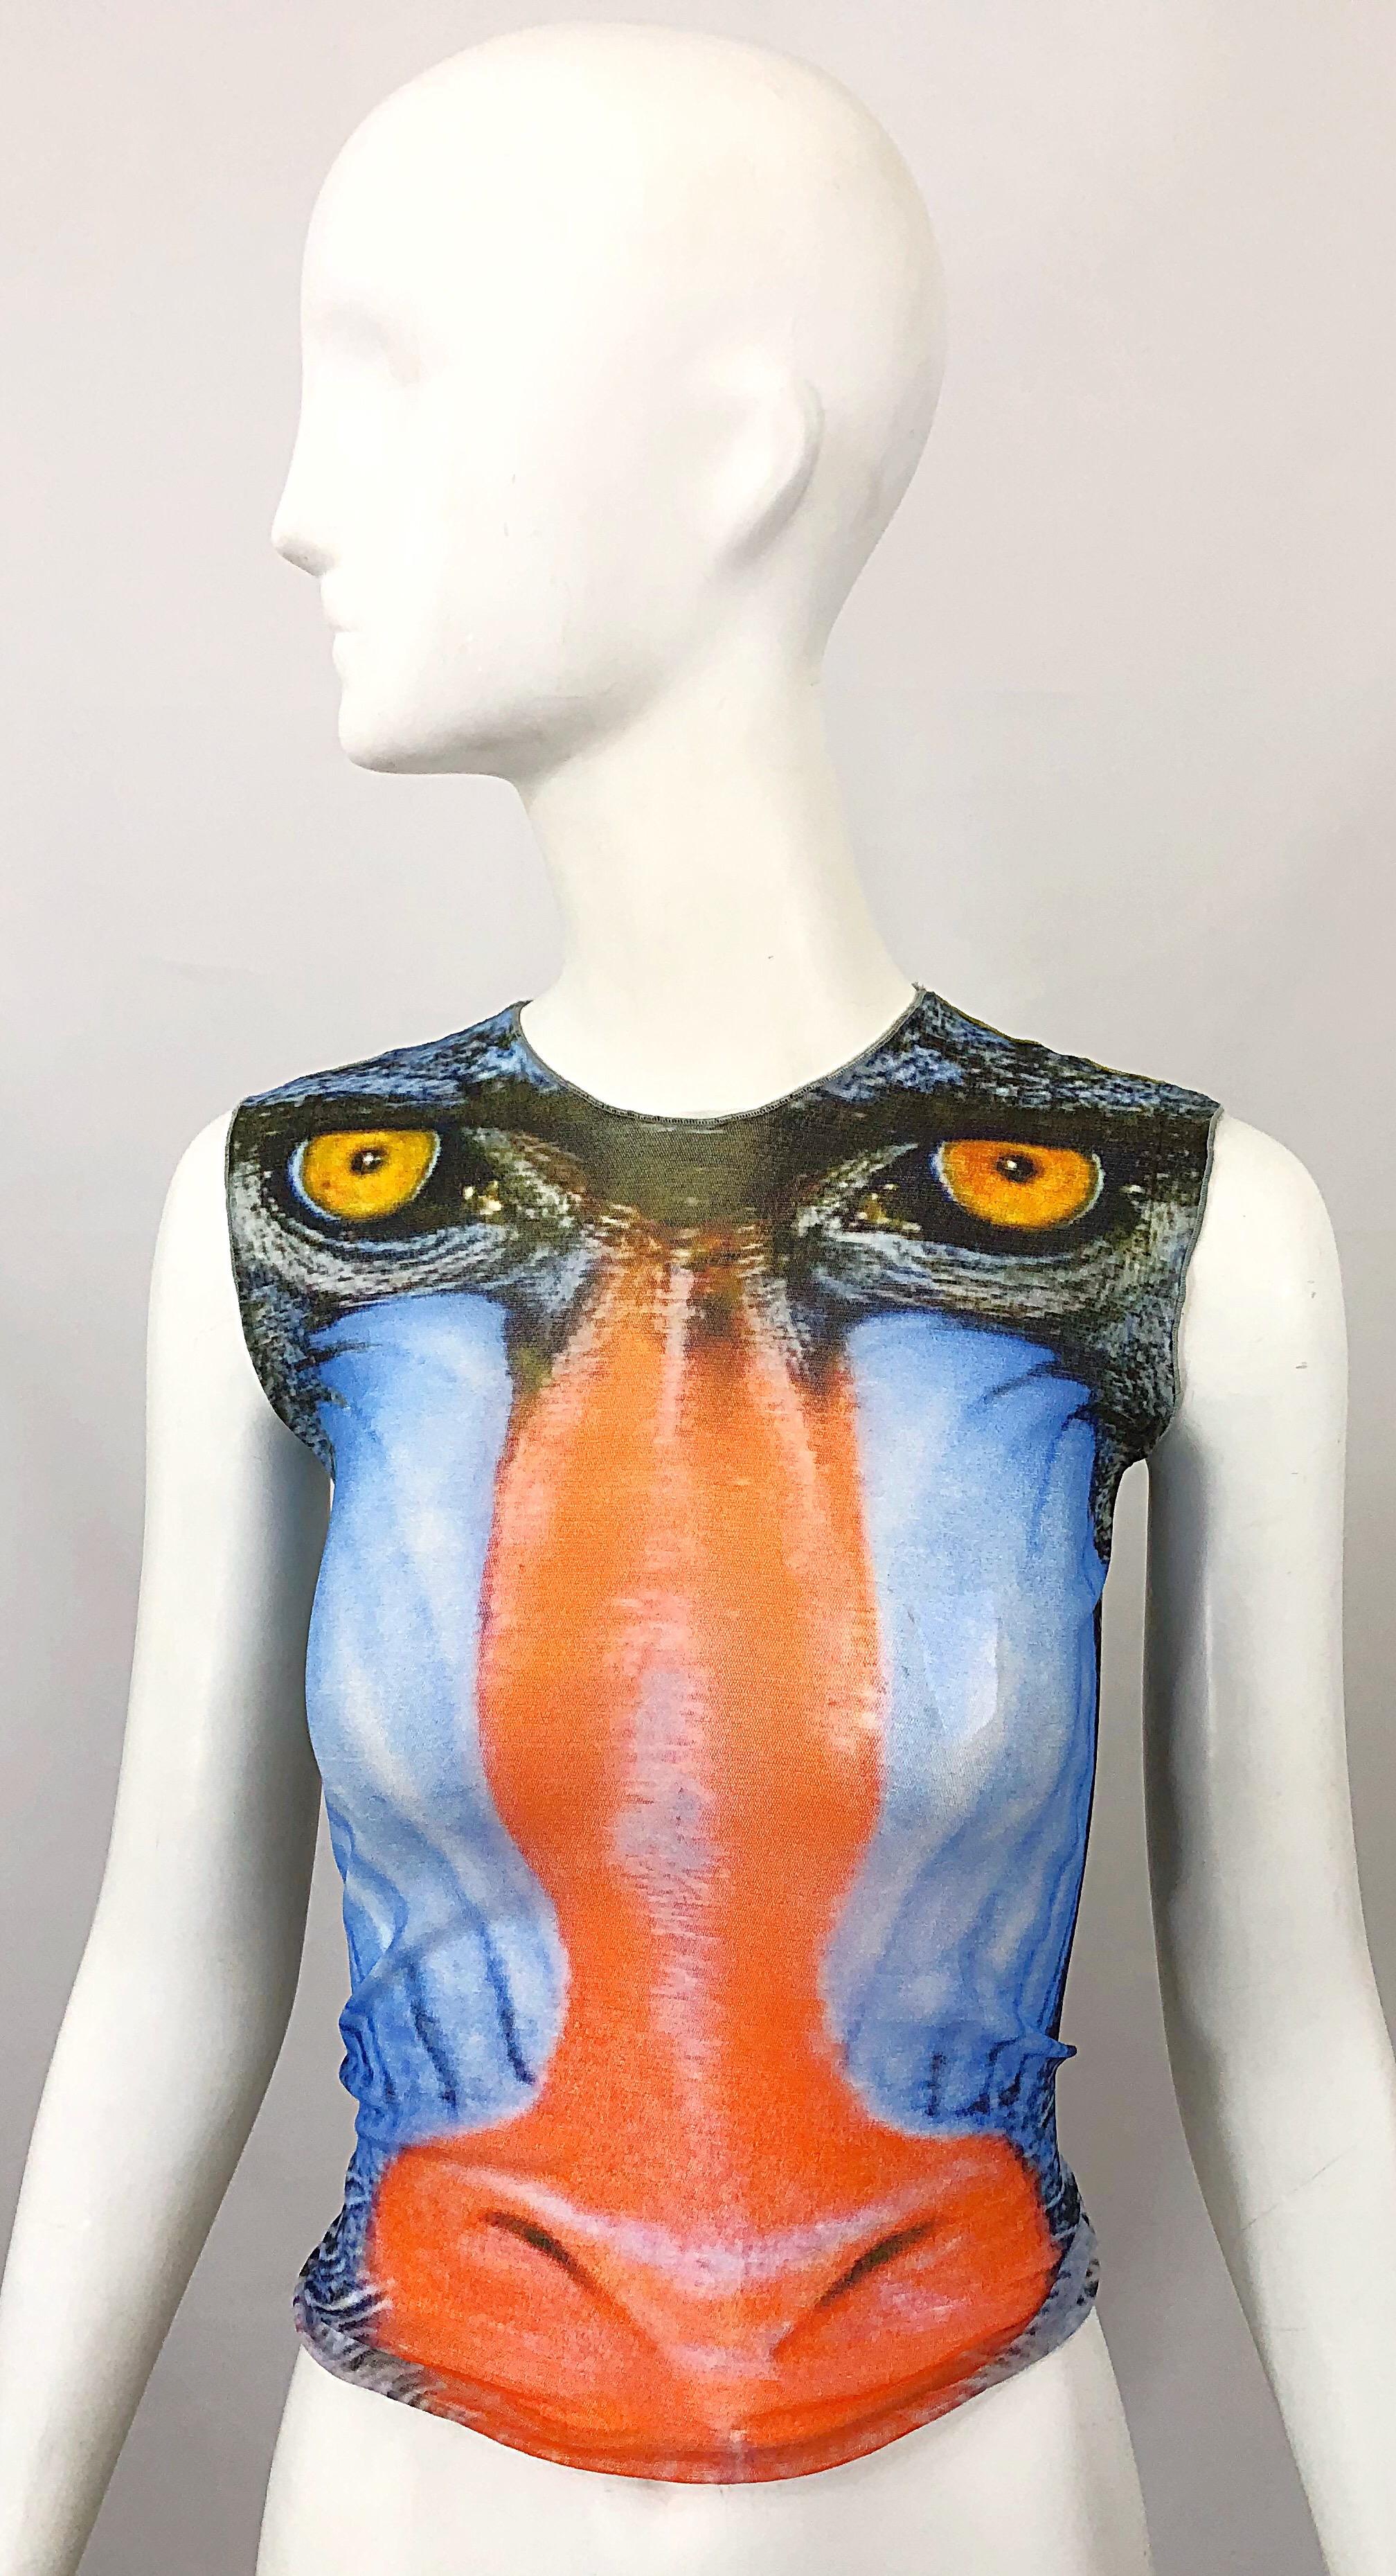 Rare and collectible vintage 90s baboon mandrill novelty print semi sheer mesh crop top! Features vibrant colors of orange, blue green, yellow, black and white. Simply slips over the head, and stretches to fit. Can easily be dressed up or down.